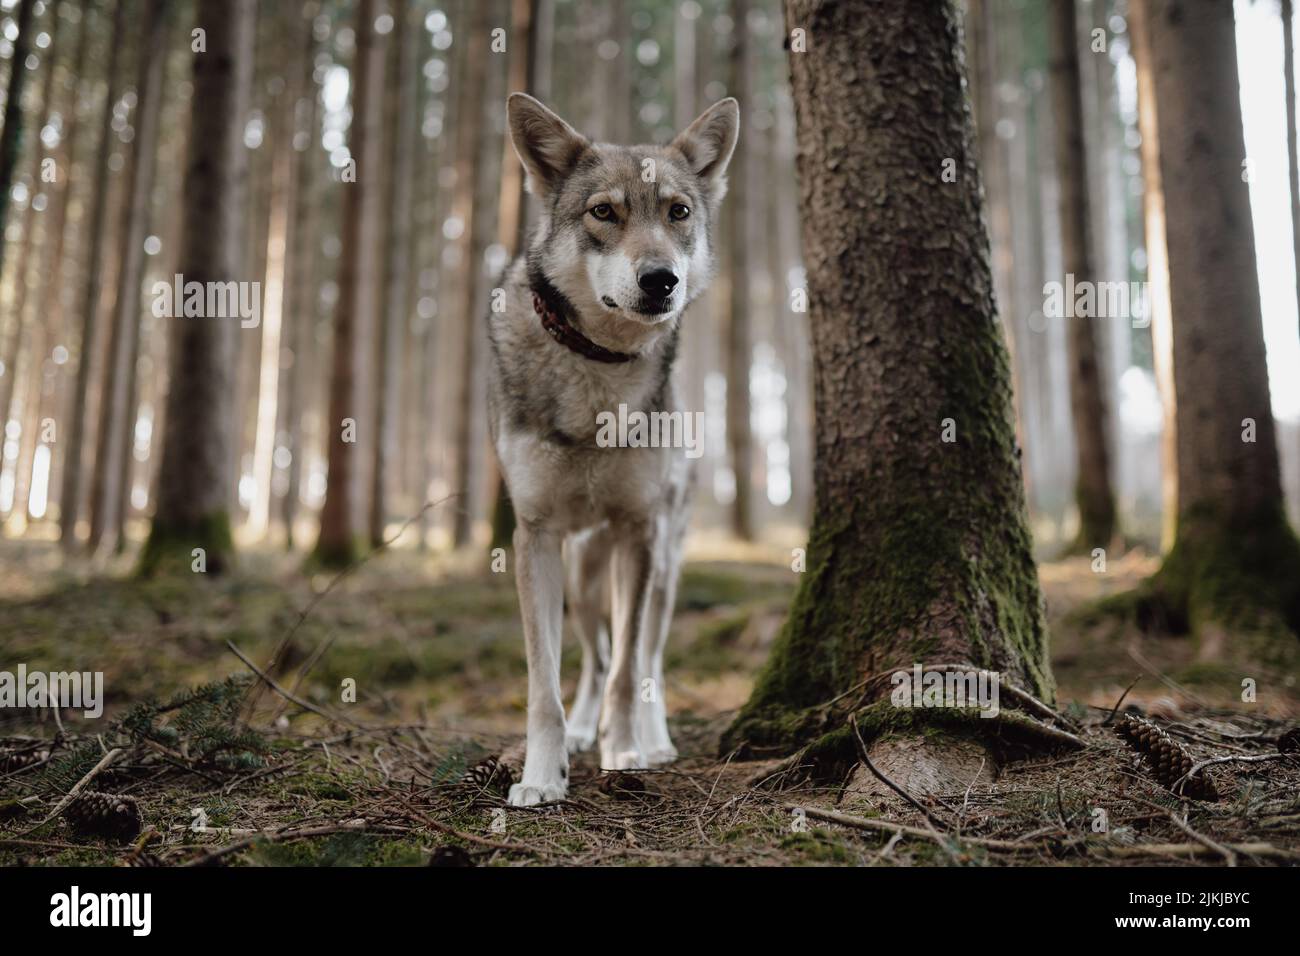 A Saarloos Wolfdog standing in the woods. Stock Photo